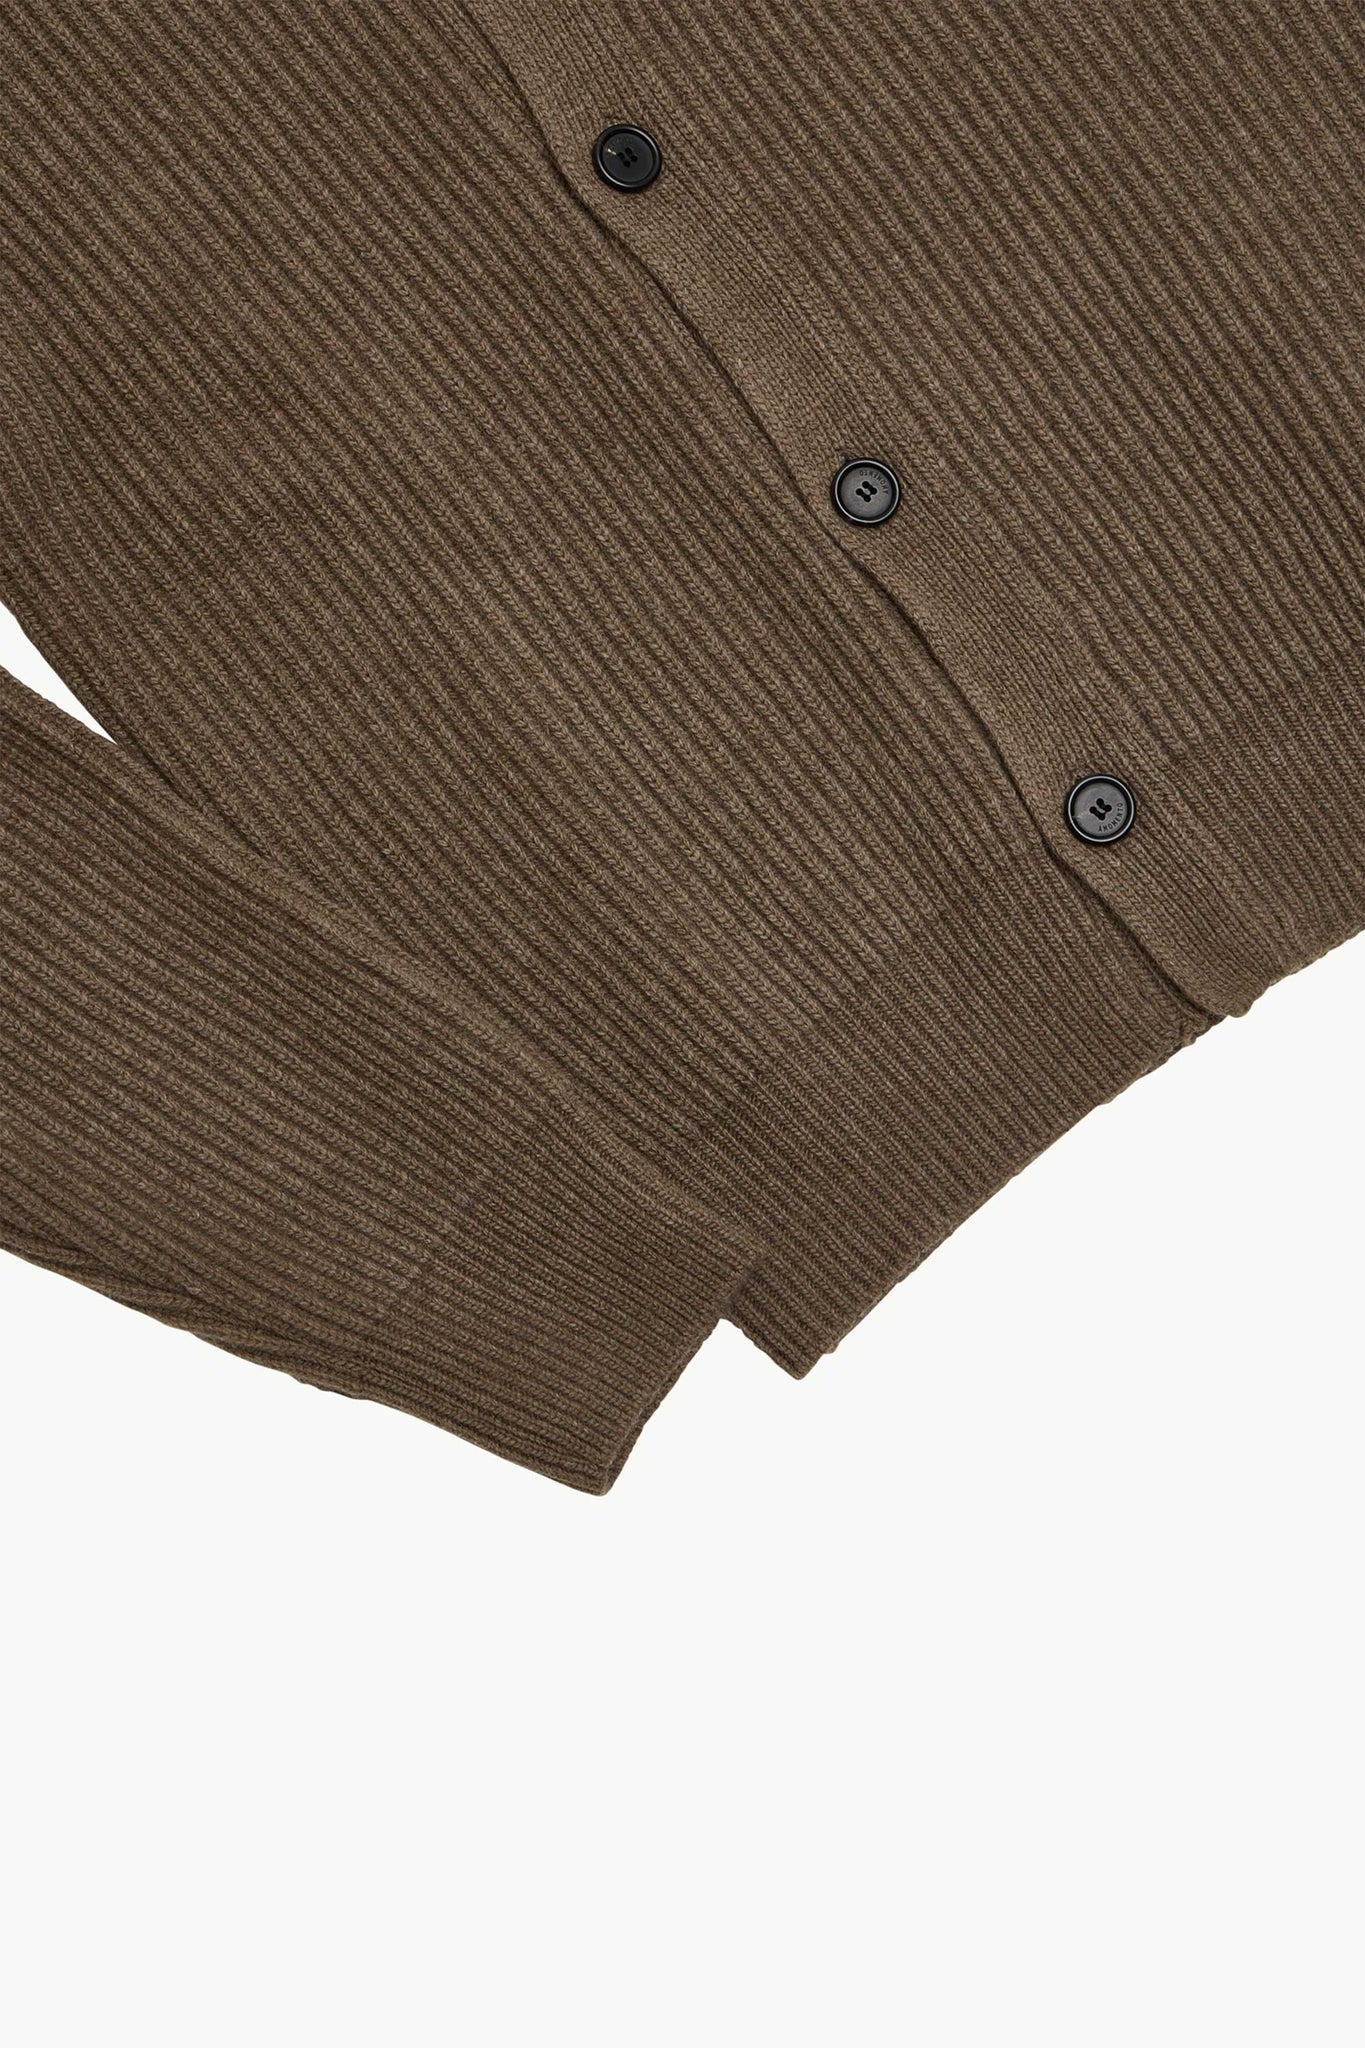 AMOMENTO RIBBED BUTTON-UP CARDIGAN